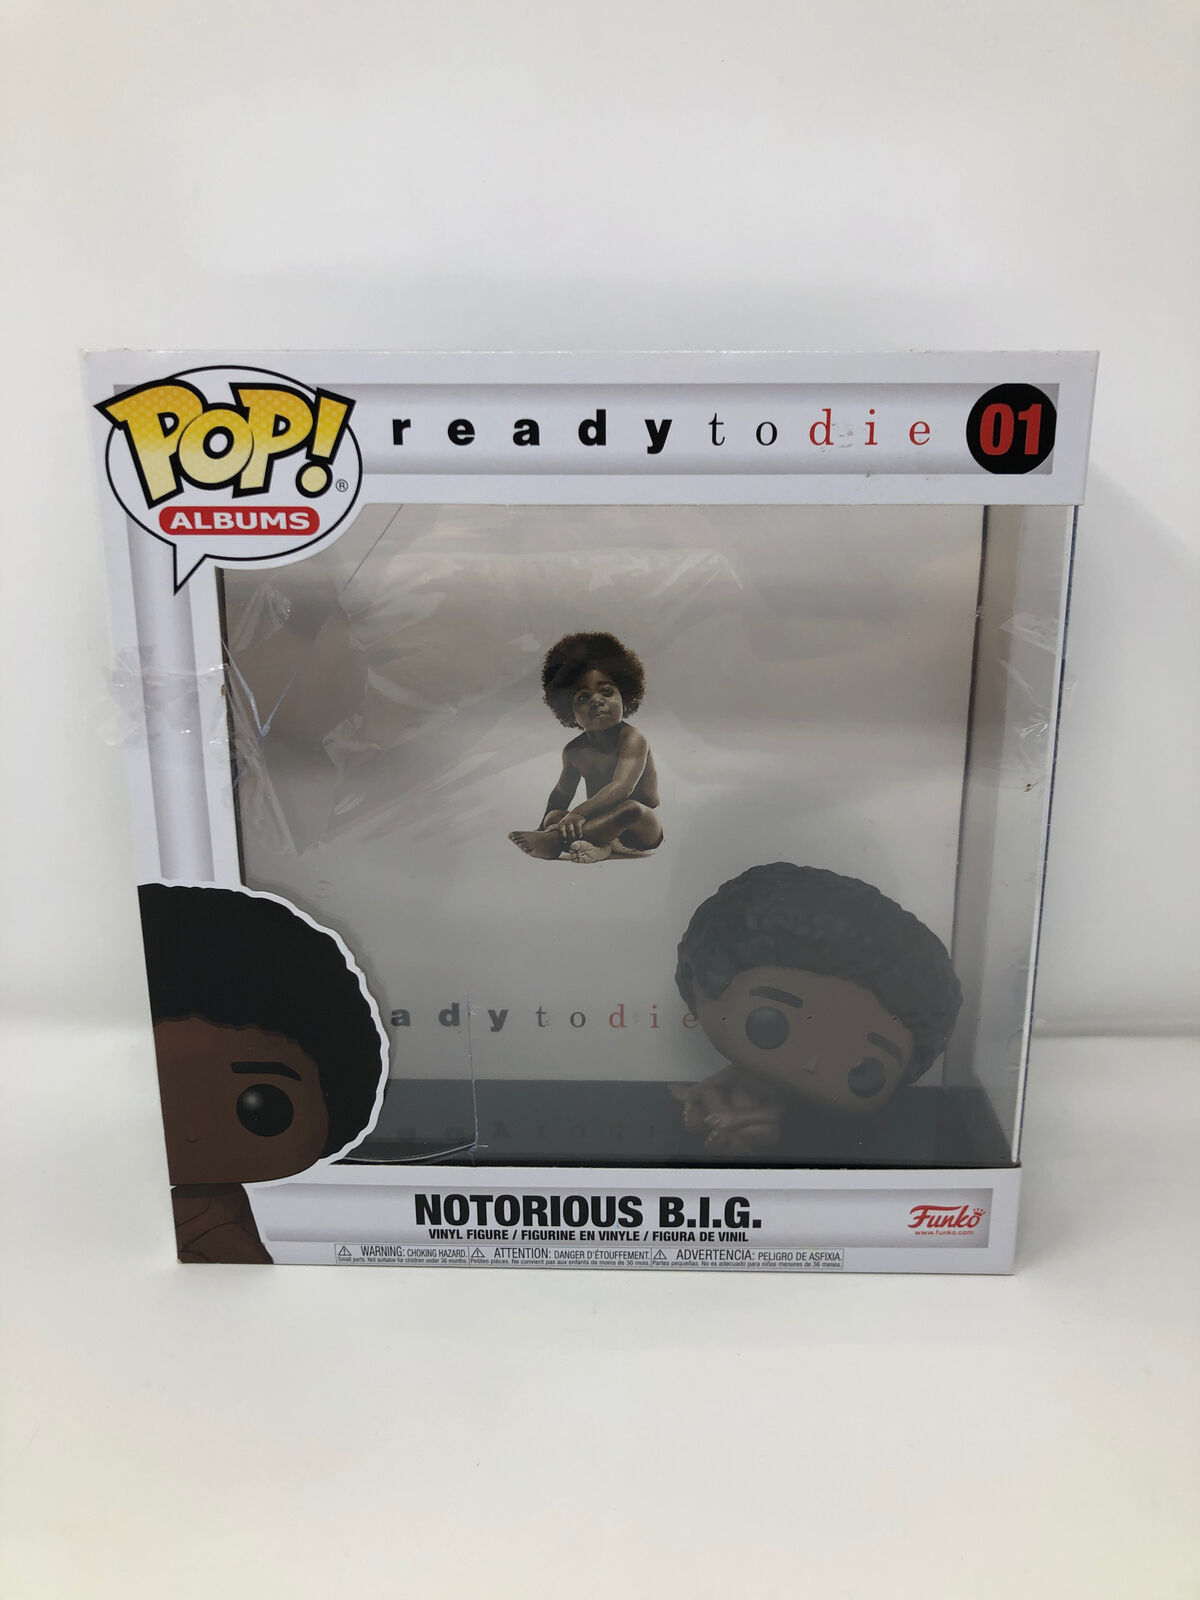 Funko POP Famous Covers Albums Notorious B.I.G:Ready to die #1 DAMAGED